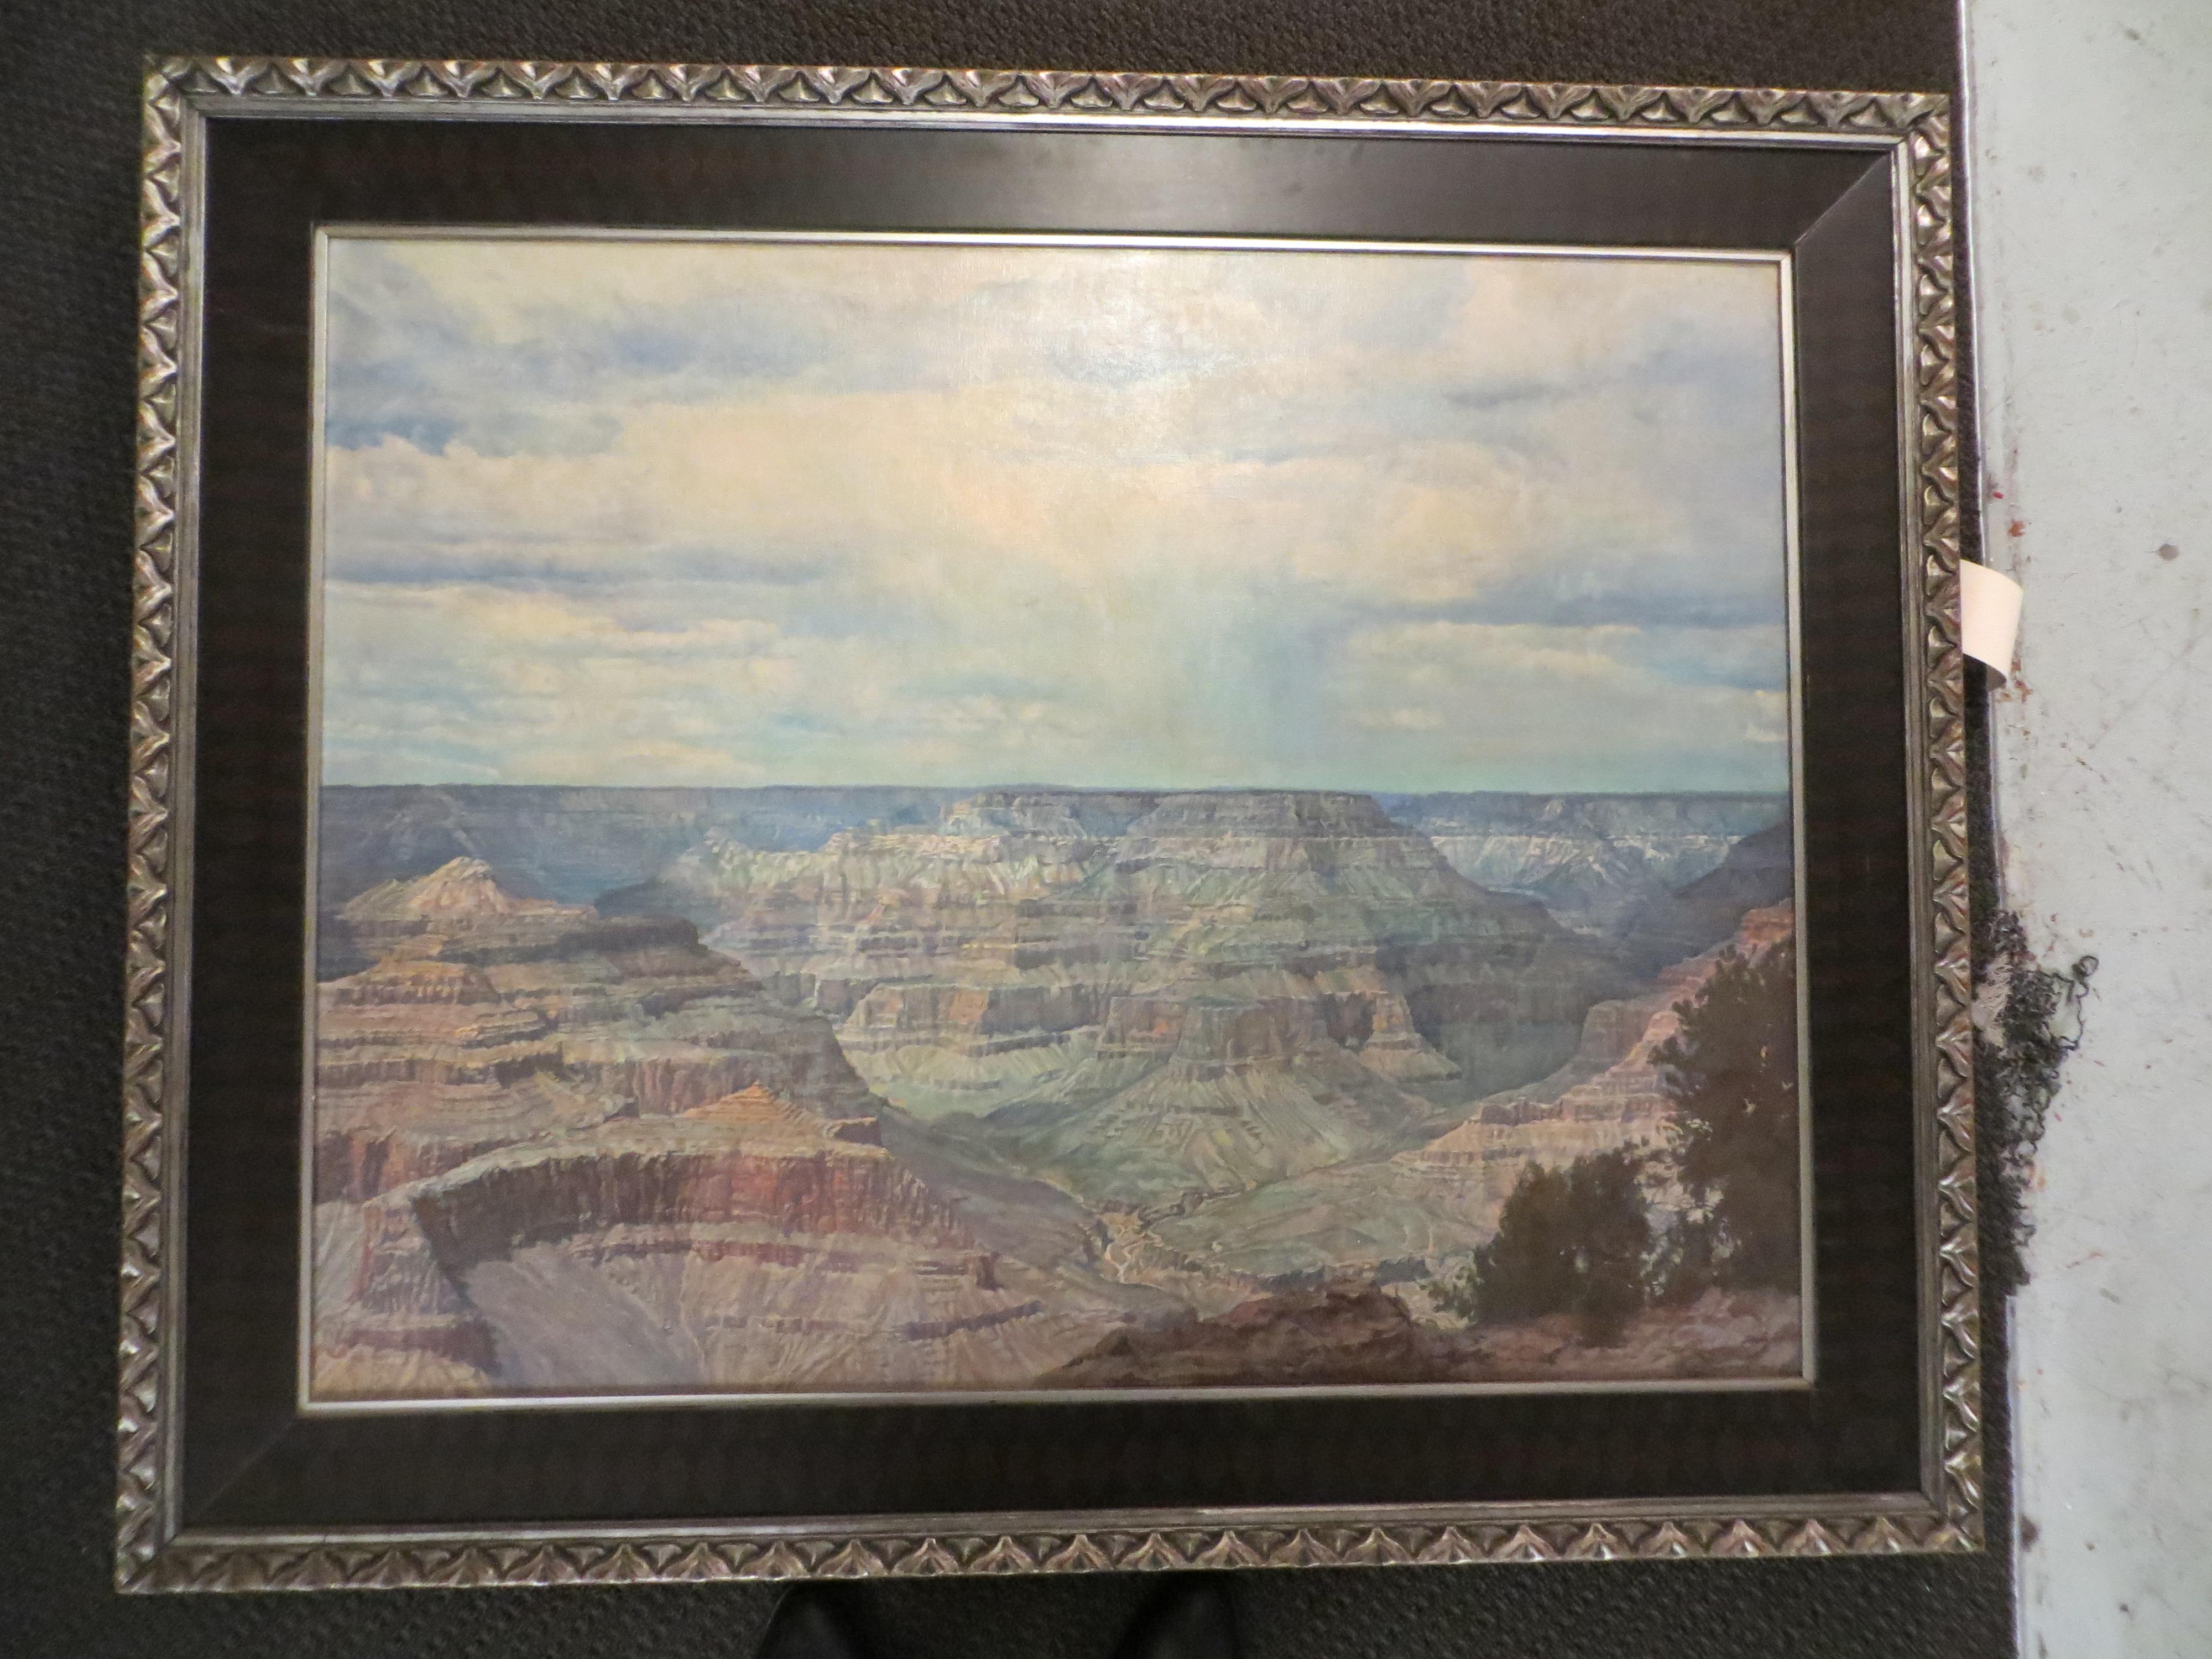 Grand Canyon view from Maricopa point  - Painting by Albert Londraville 